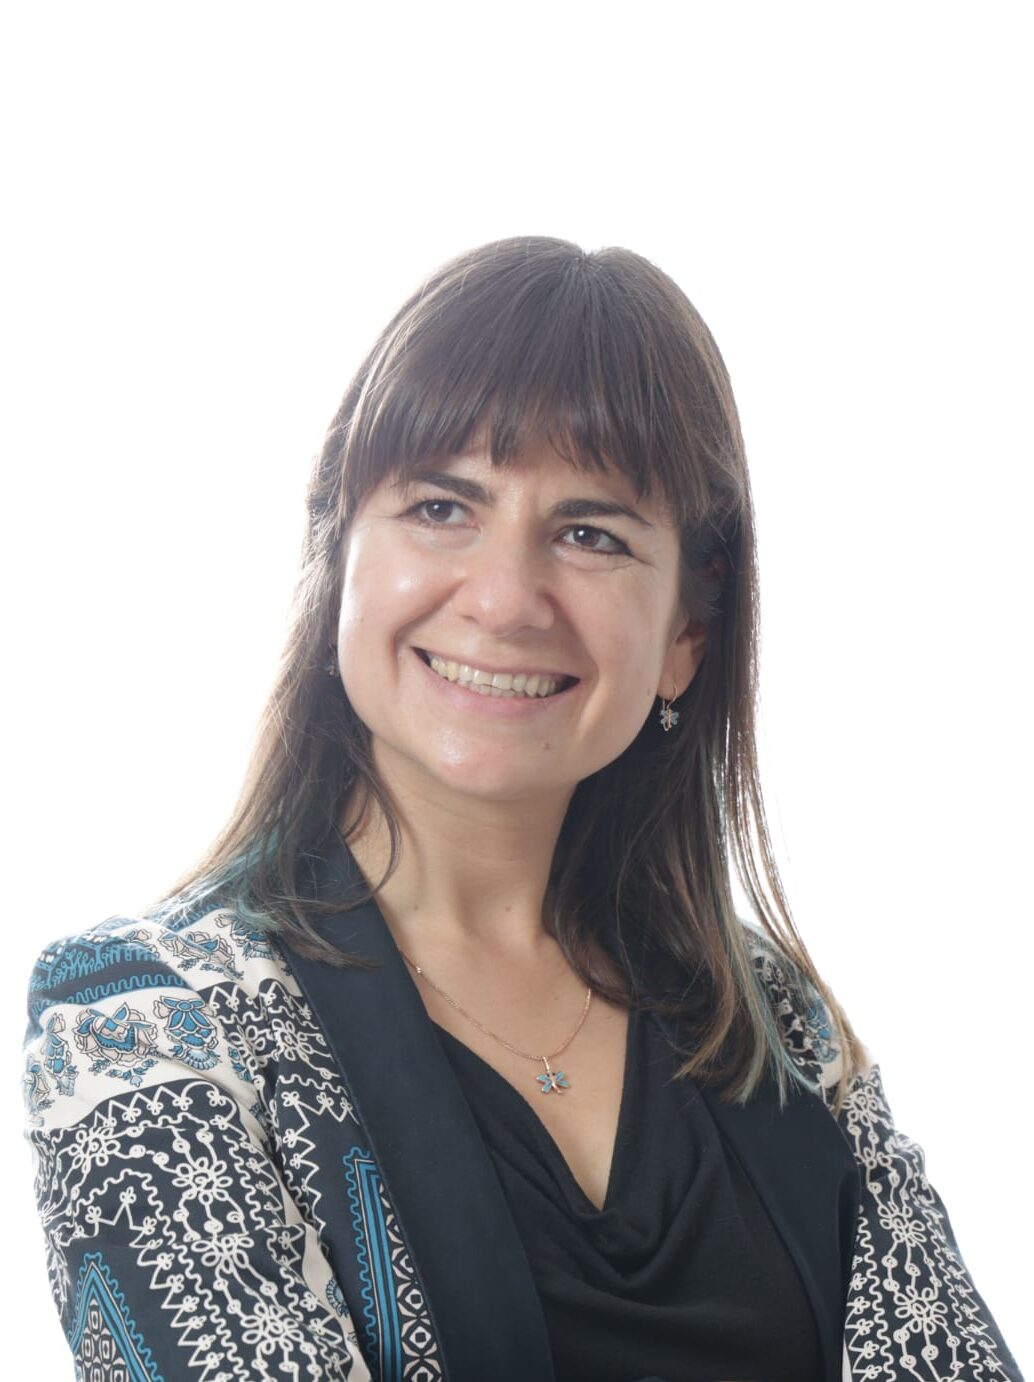 Picture of Dina Safina, Ph.D.